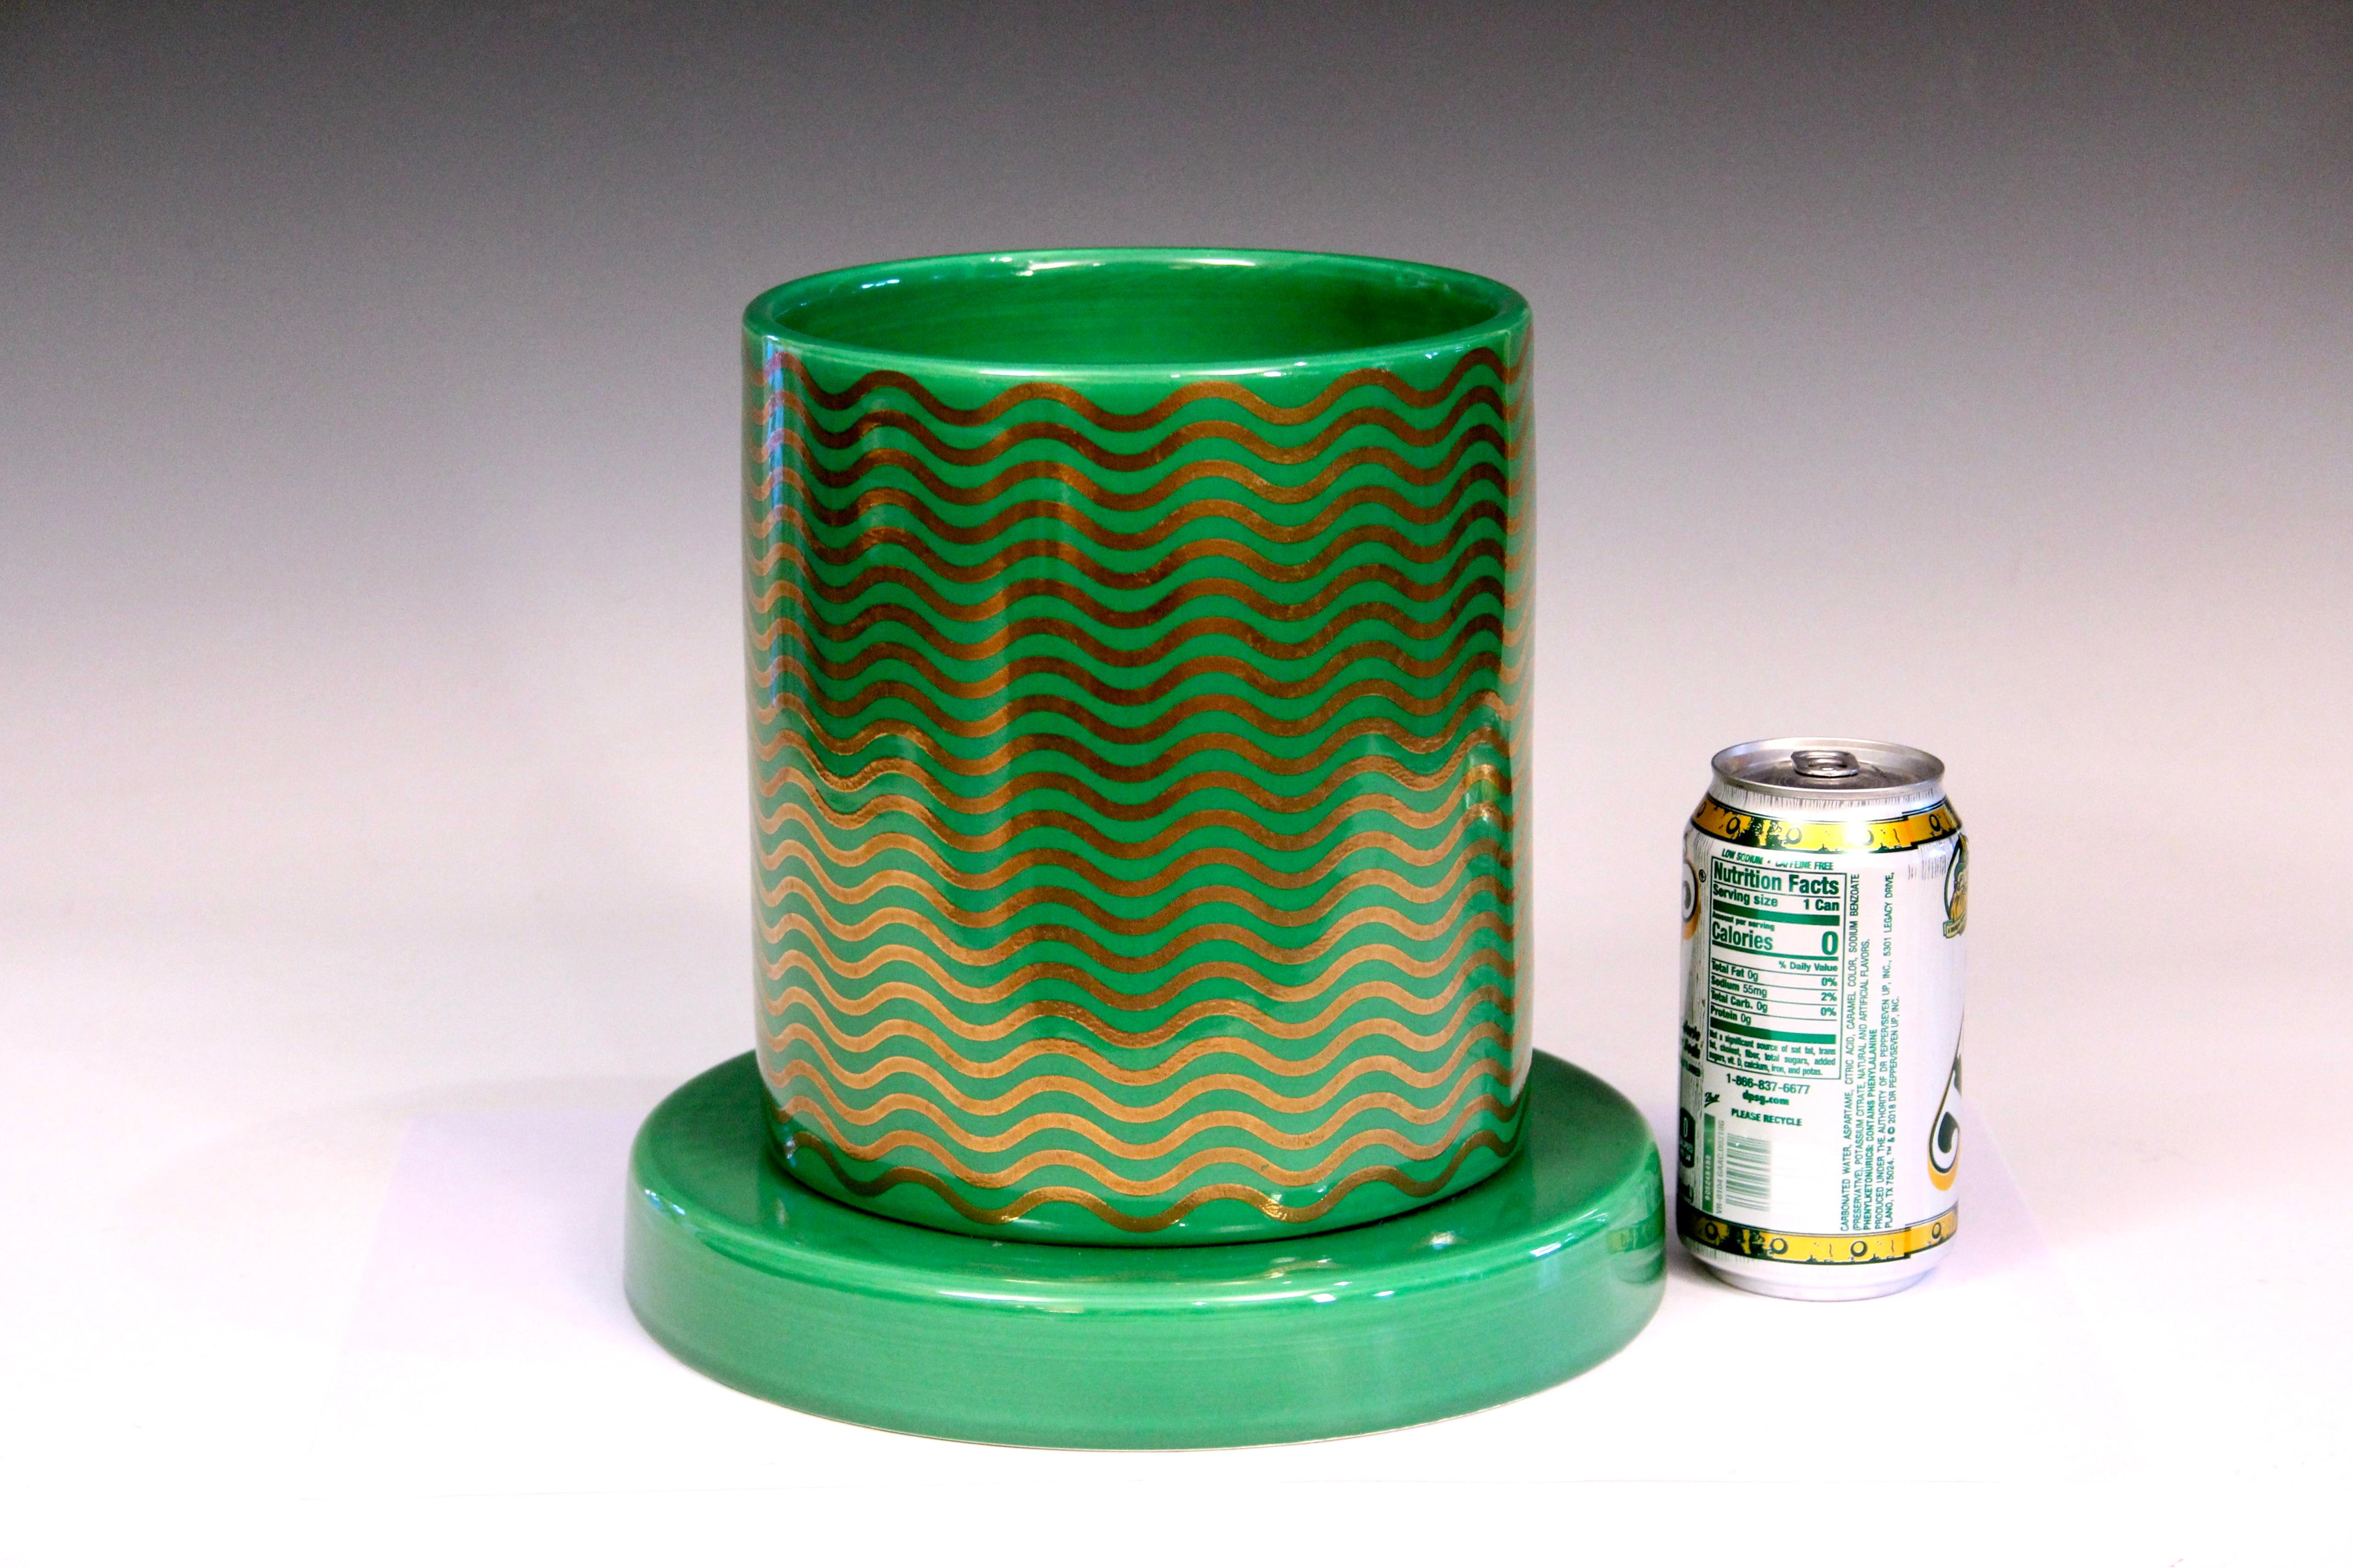 Ettore Sottsass Vase Mediterraneo Green Gilt Waves Lavori in Corso Signed Dated For Sale 1